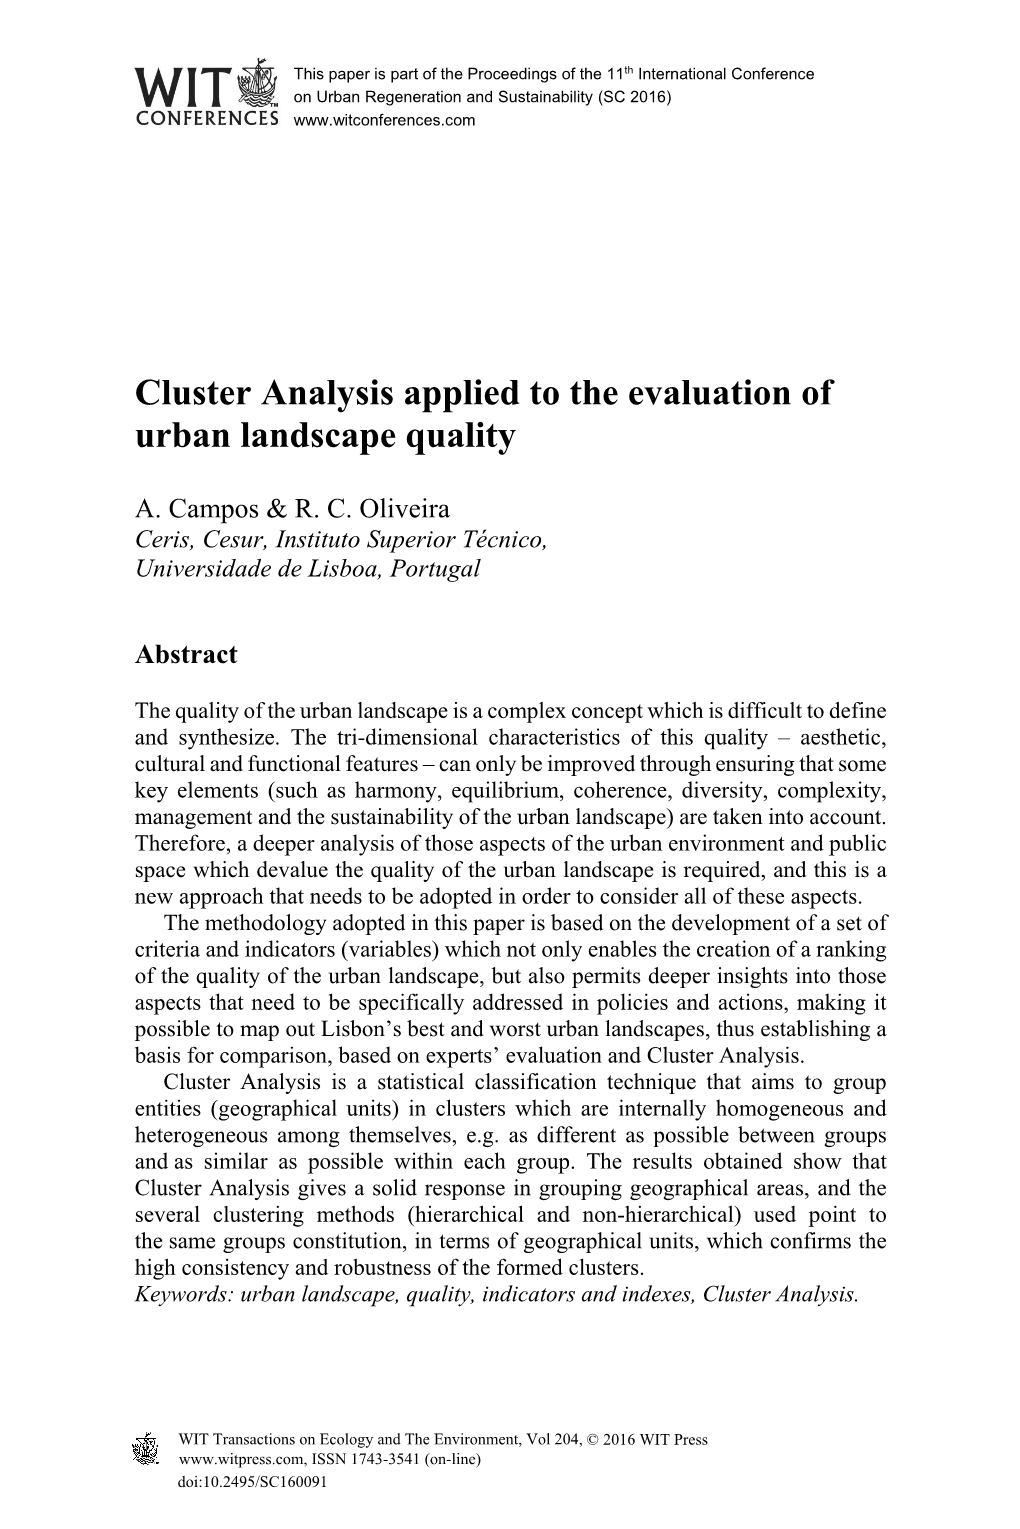 Cluster Analysis Applied to the Evaluation of Urban Landscape Quality